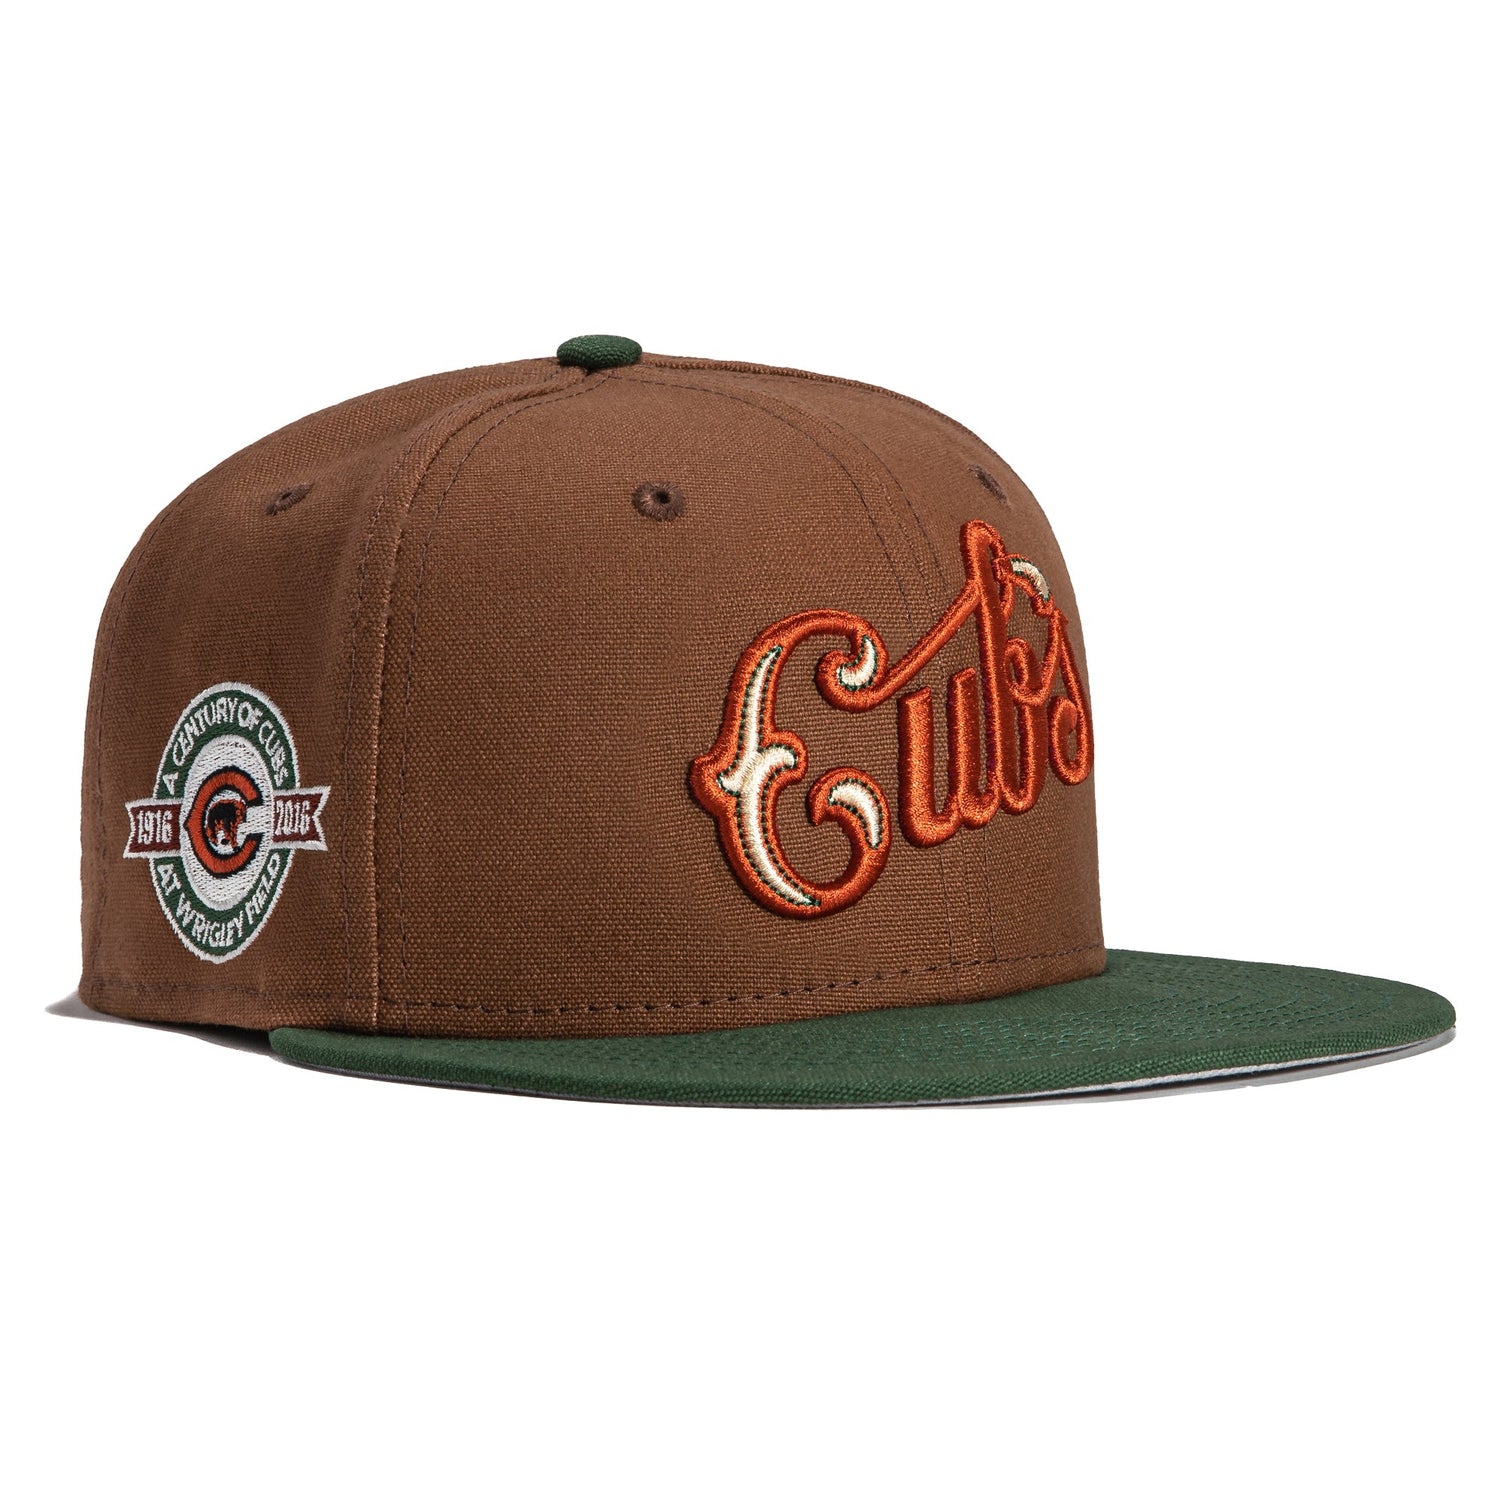 New Era Chicago Cubs PBJ Wrigley Field Patch Alternate Hat Club Exclusive 59FIFTY Fitted Hat Tan/Brown